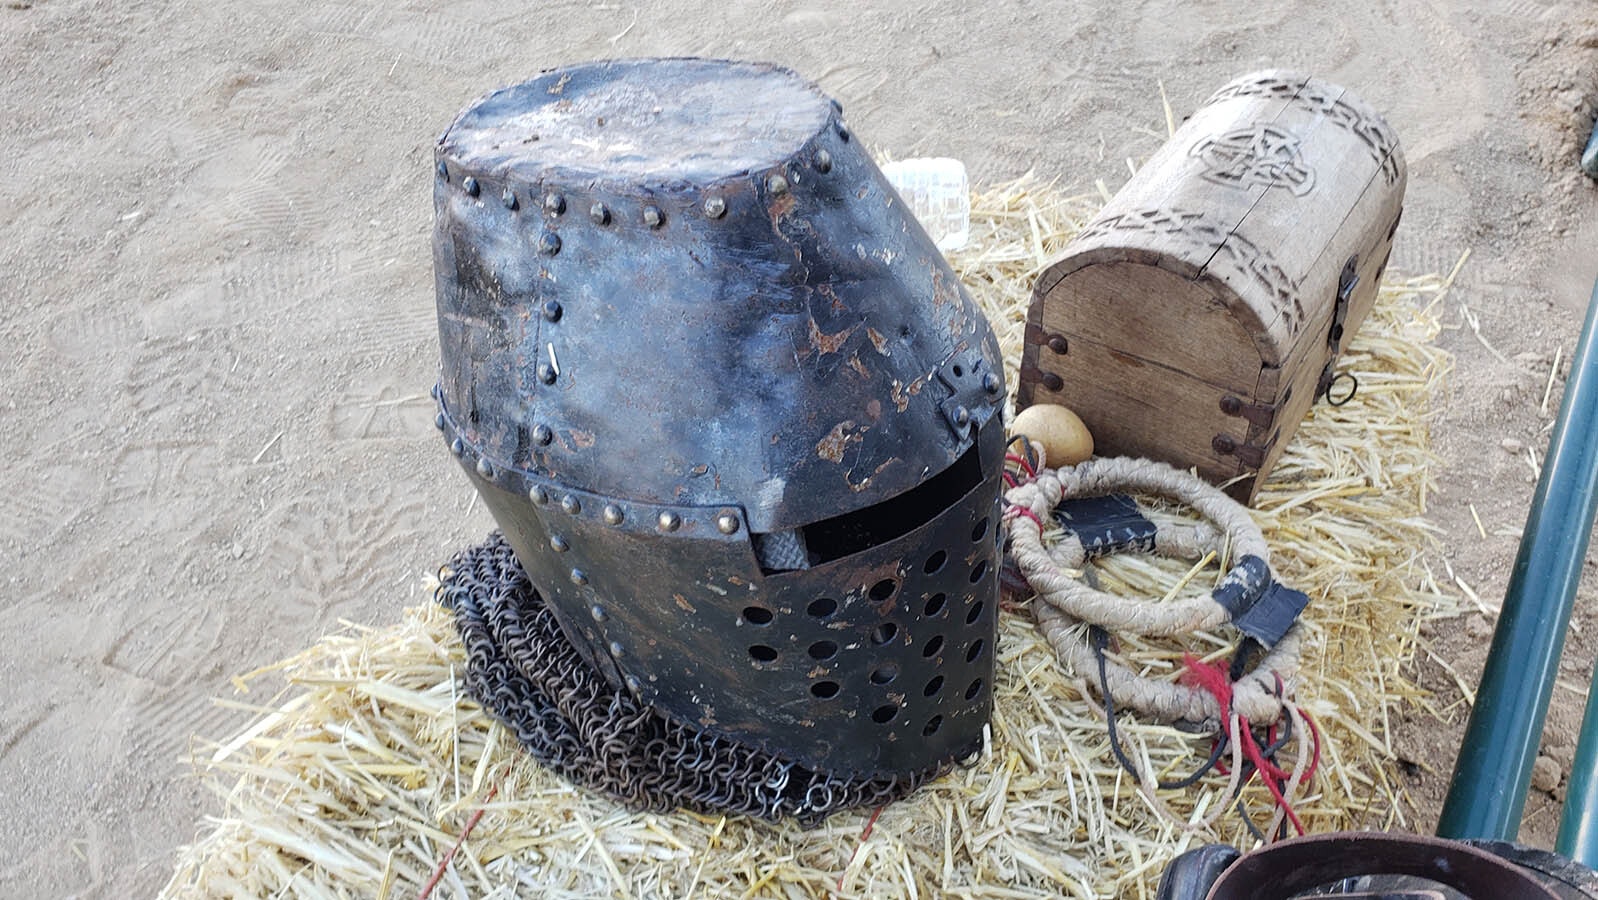 The jousting helmets restrict vision to a tiny slit.